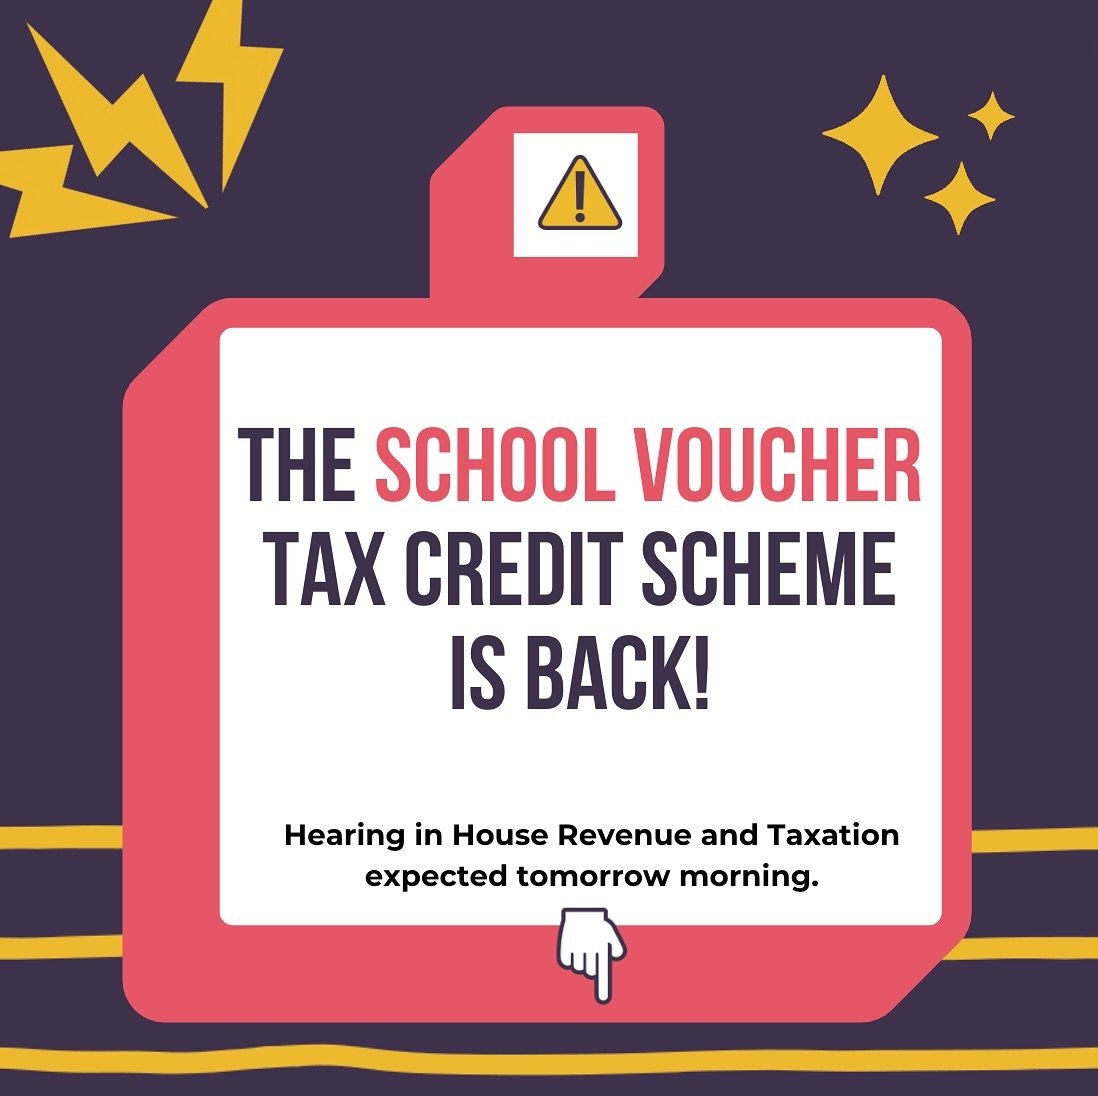 The school voucher tax scheme bill, HB 447, has&nbsp;been sitting in the House Revenue and Taxation for five&nbsp;weeks.  It&rsquo;s on the agenda for tomorrow morning.

We need to respectfully remind&nbsp;members of the committee that we do not want